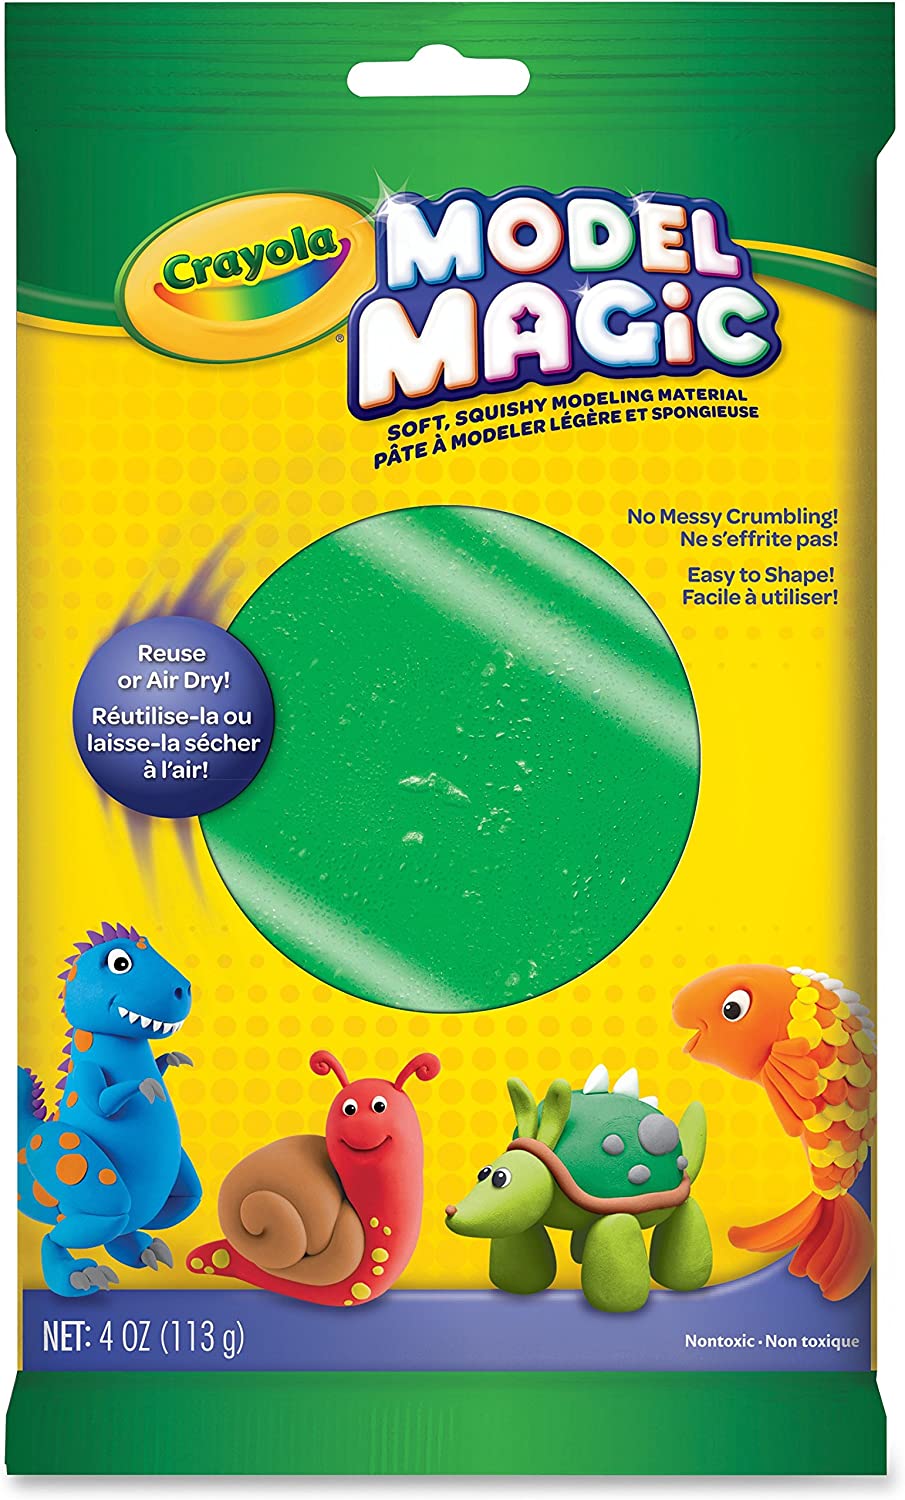 Crayola Model Magic, Modeling Material, .5 Ounces 6/Pkg-Primary